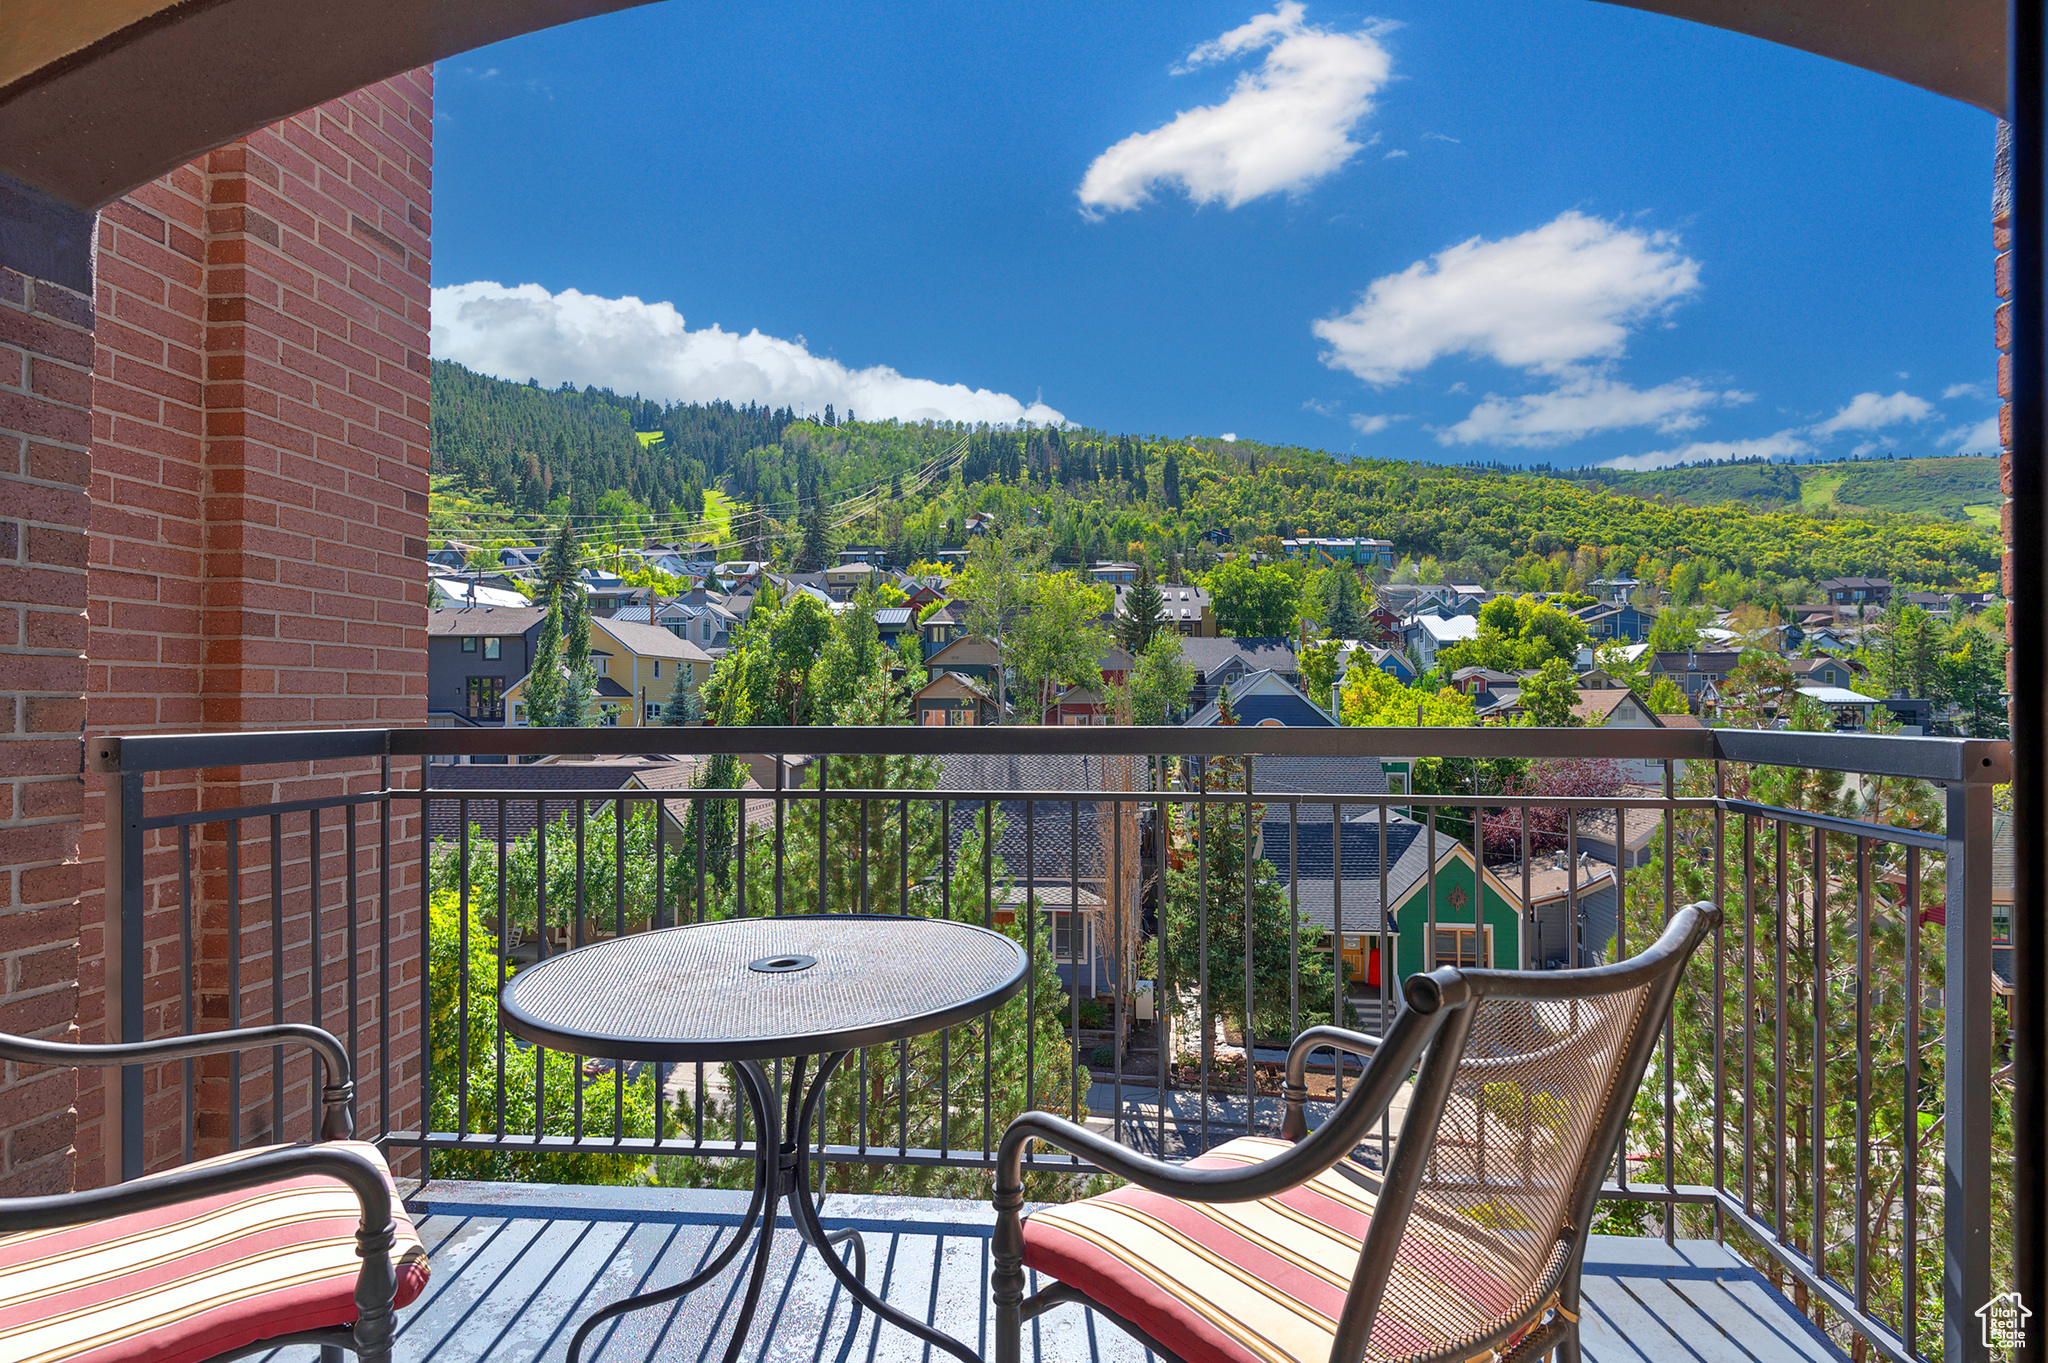 950 PARK AVE #143, Park City, Utah 84060, 2 Bedrooms Bedrooms, 7 Rooms Rooms,2 BathroomsBathrooms,Residential,For sale,PARK AVE #143,1993388